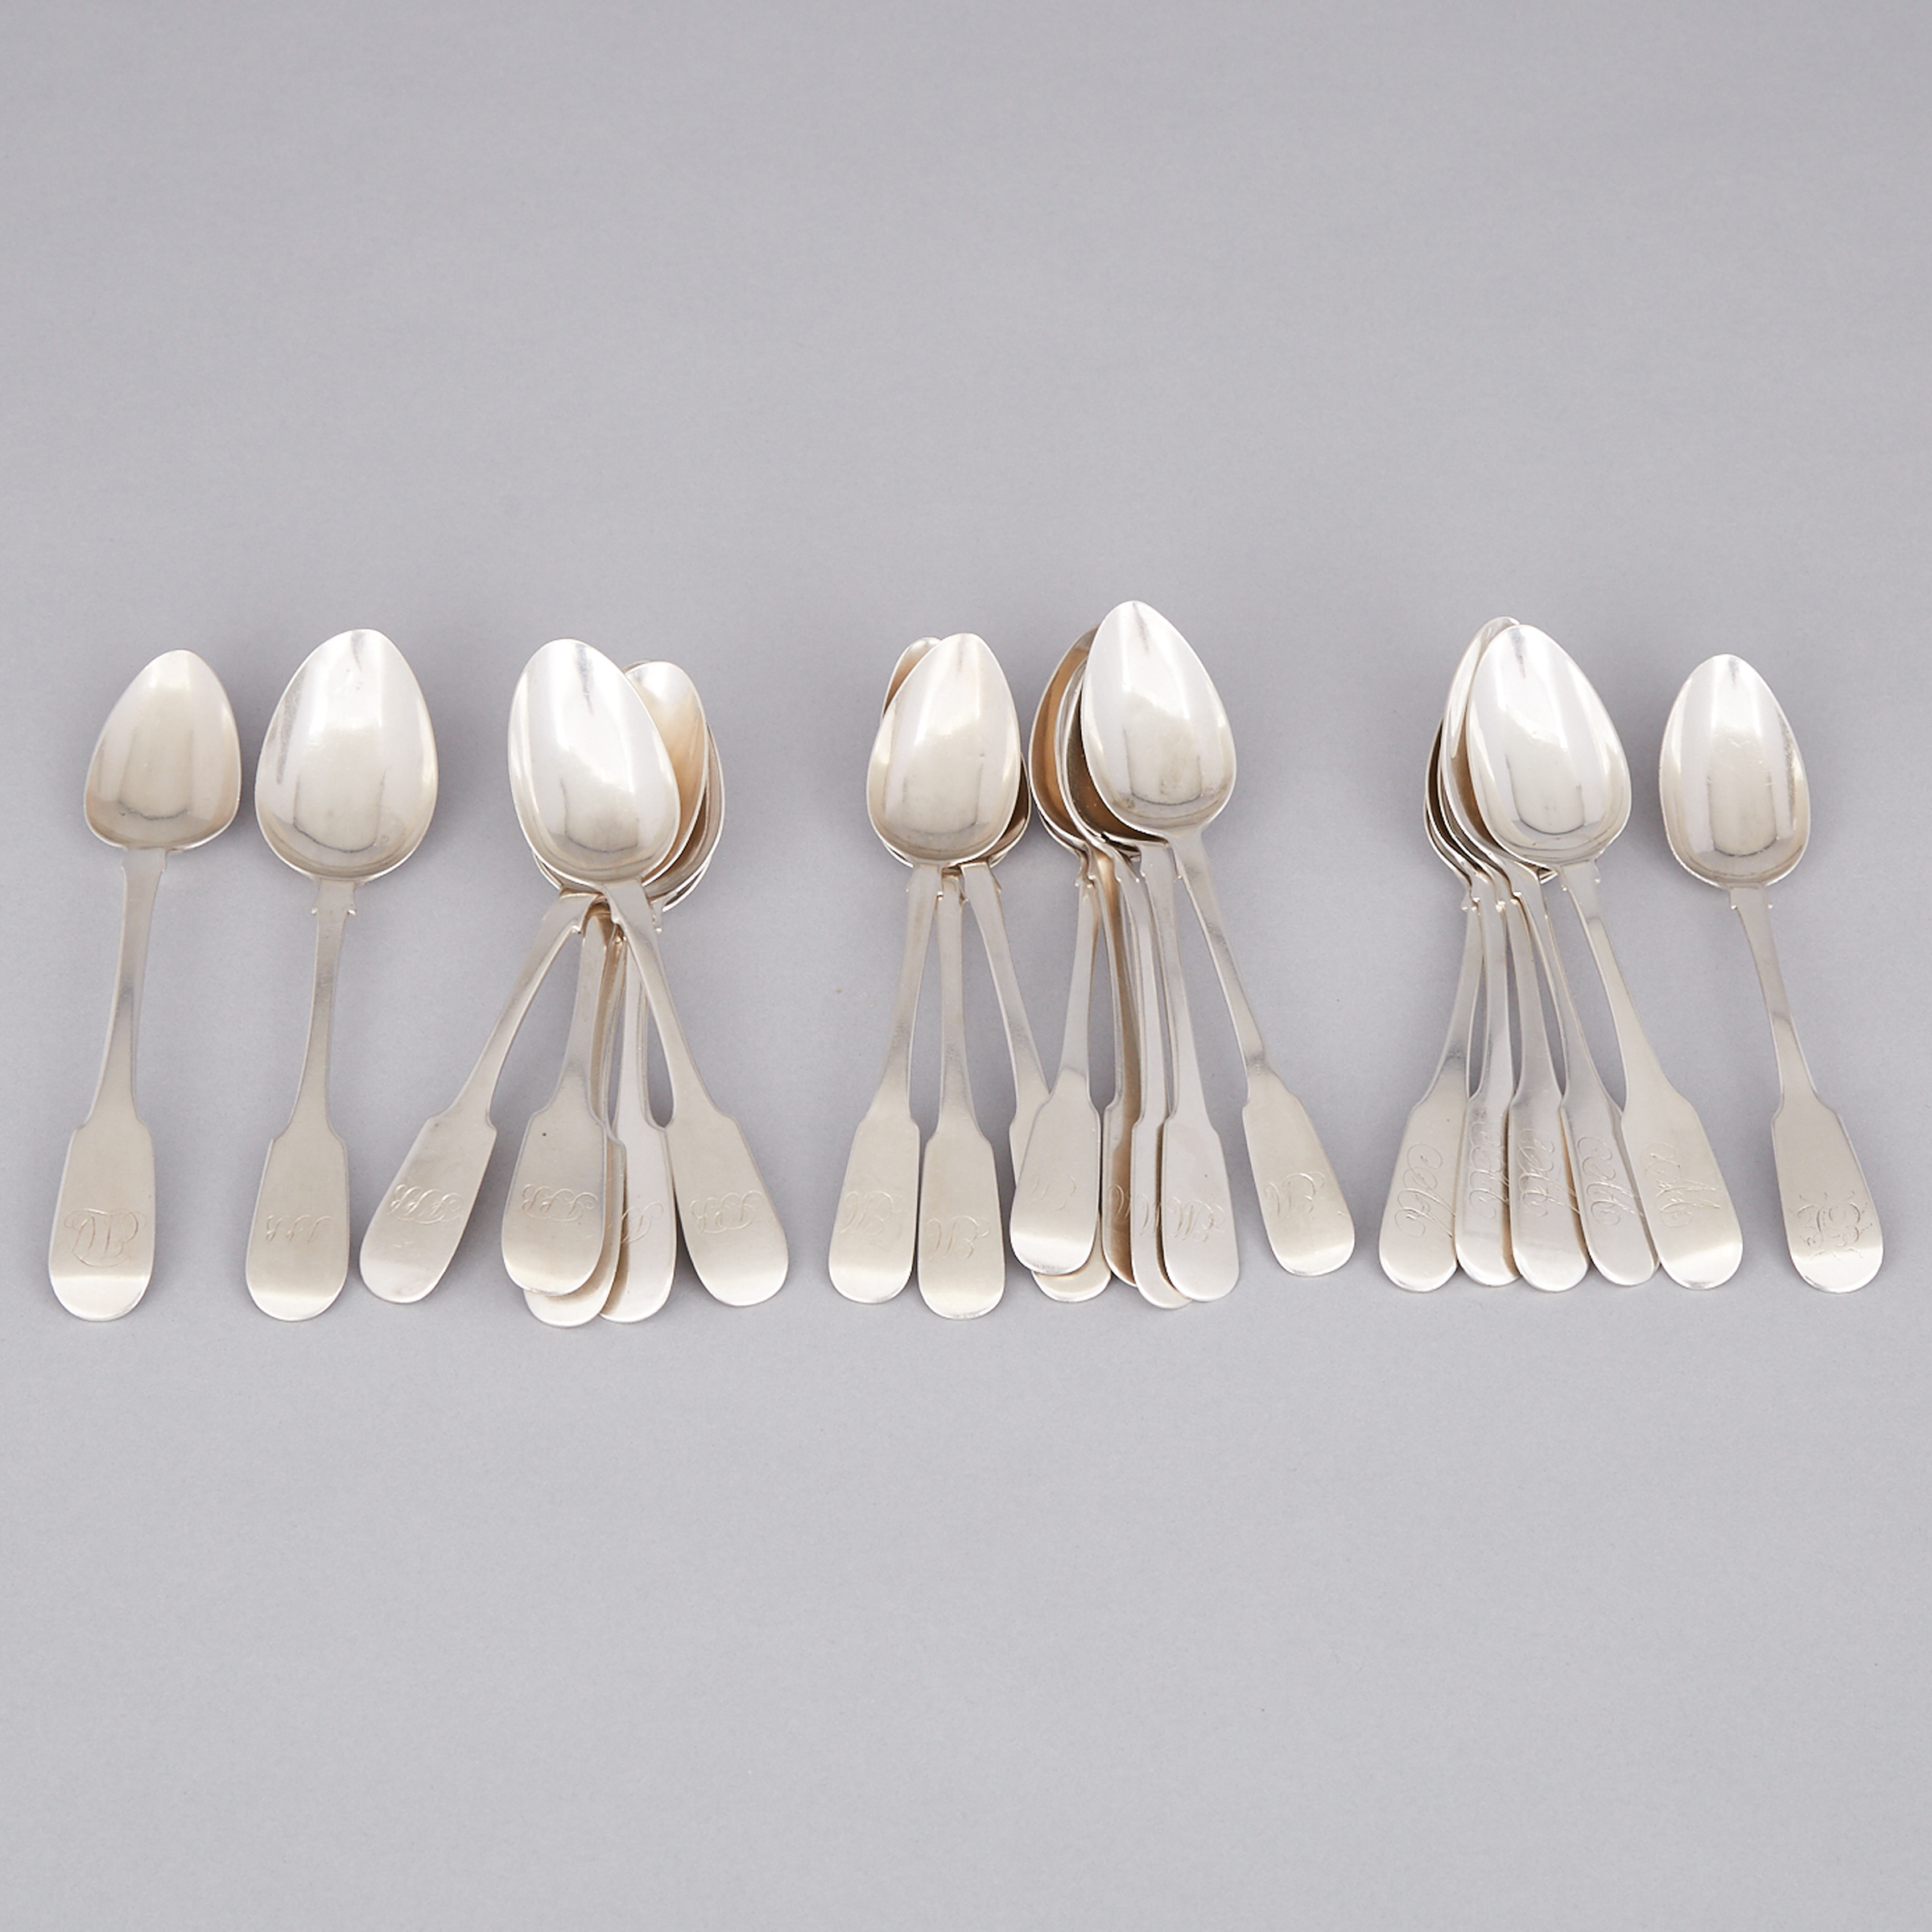 Twenty-One Canadian Silver Fiddle Pattern Tea Spoons, Quebec City & Montreal, Que., 19th century